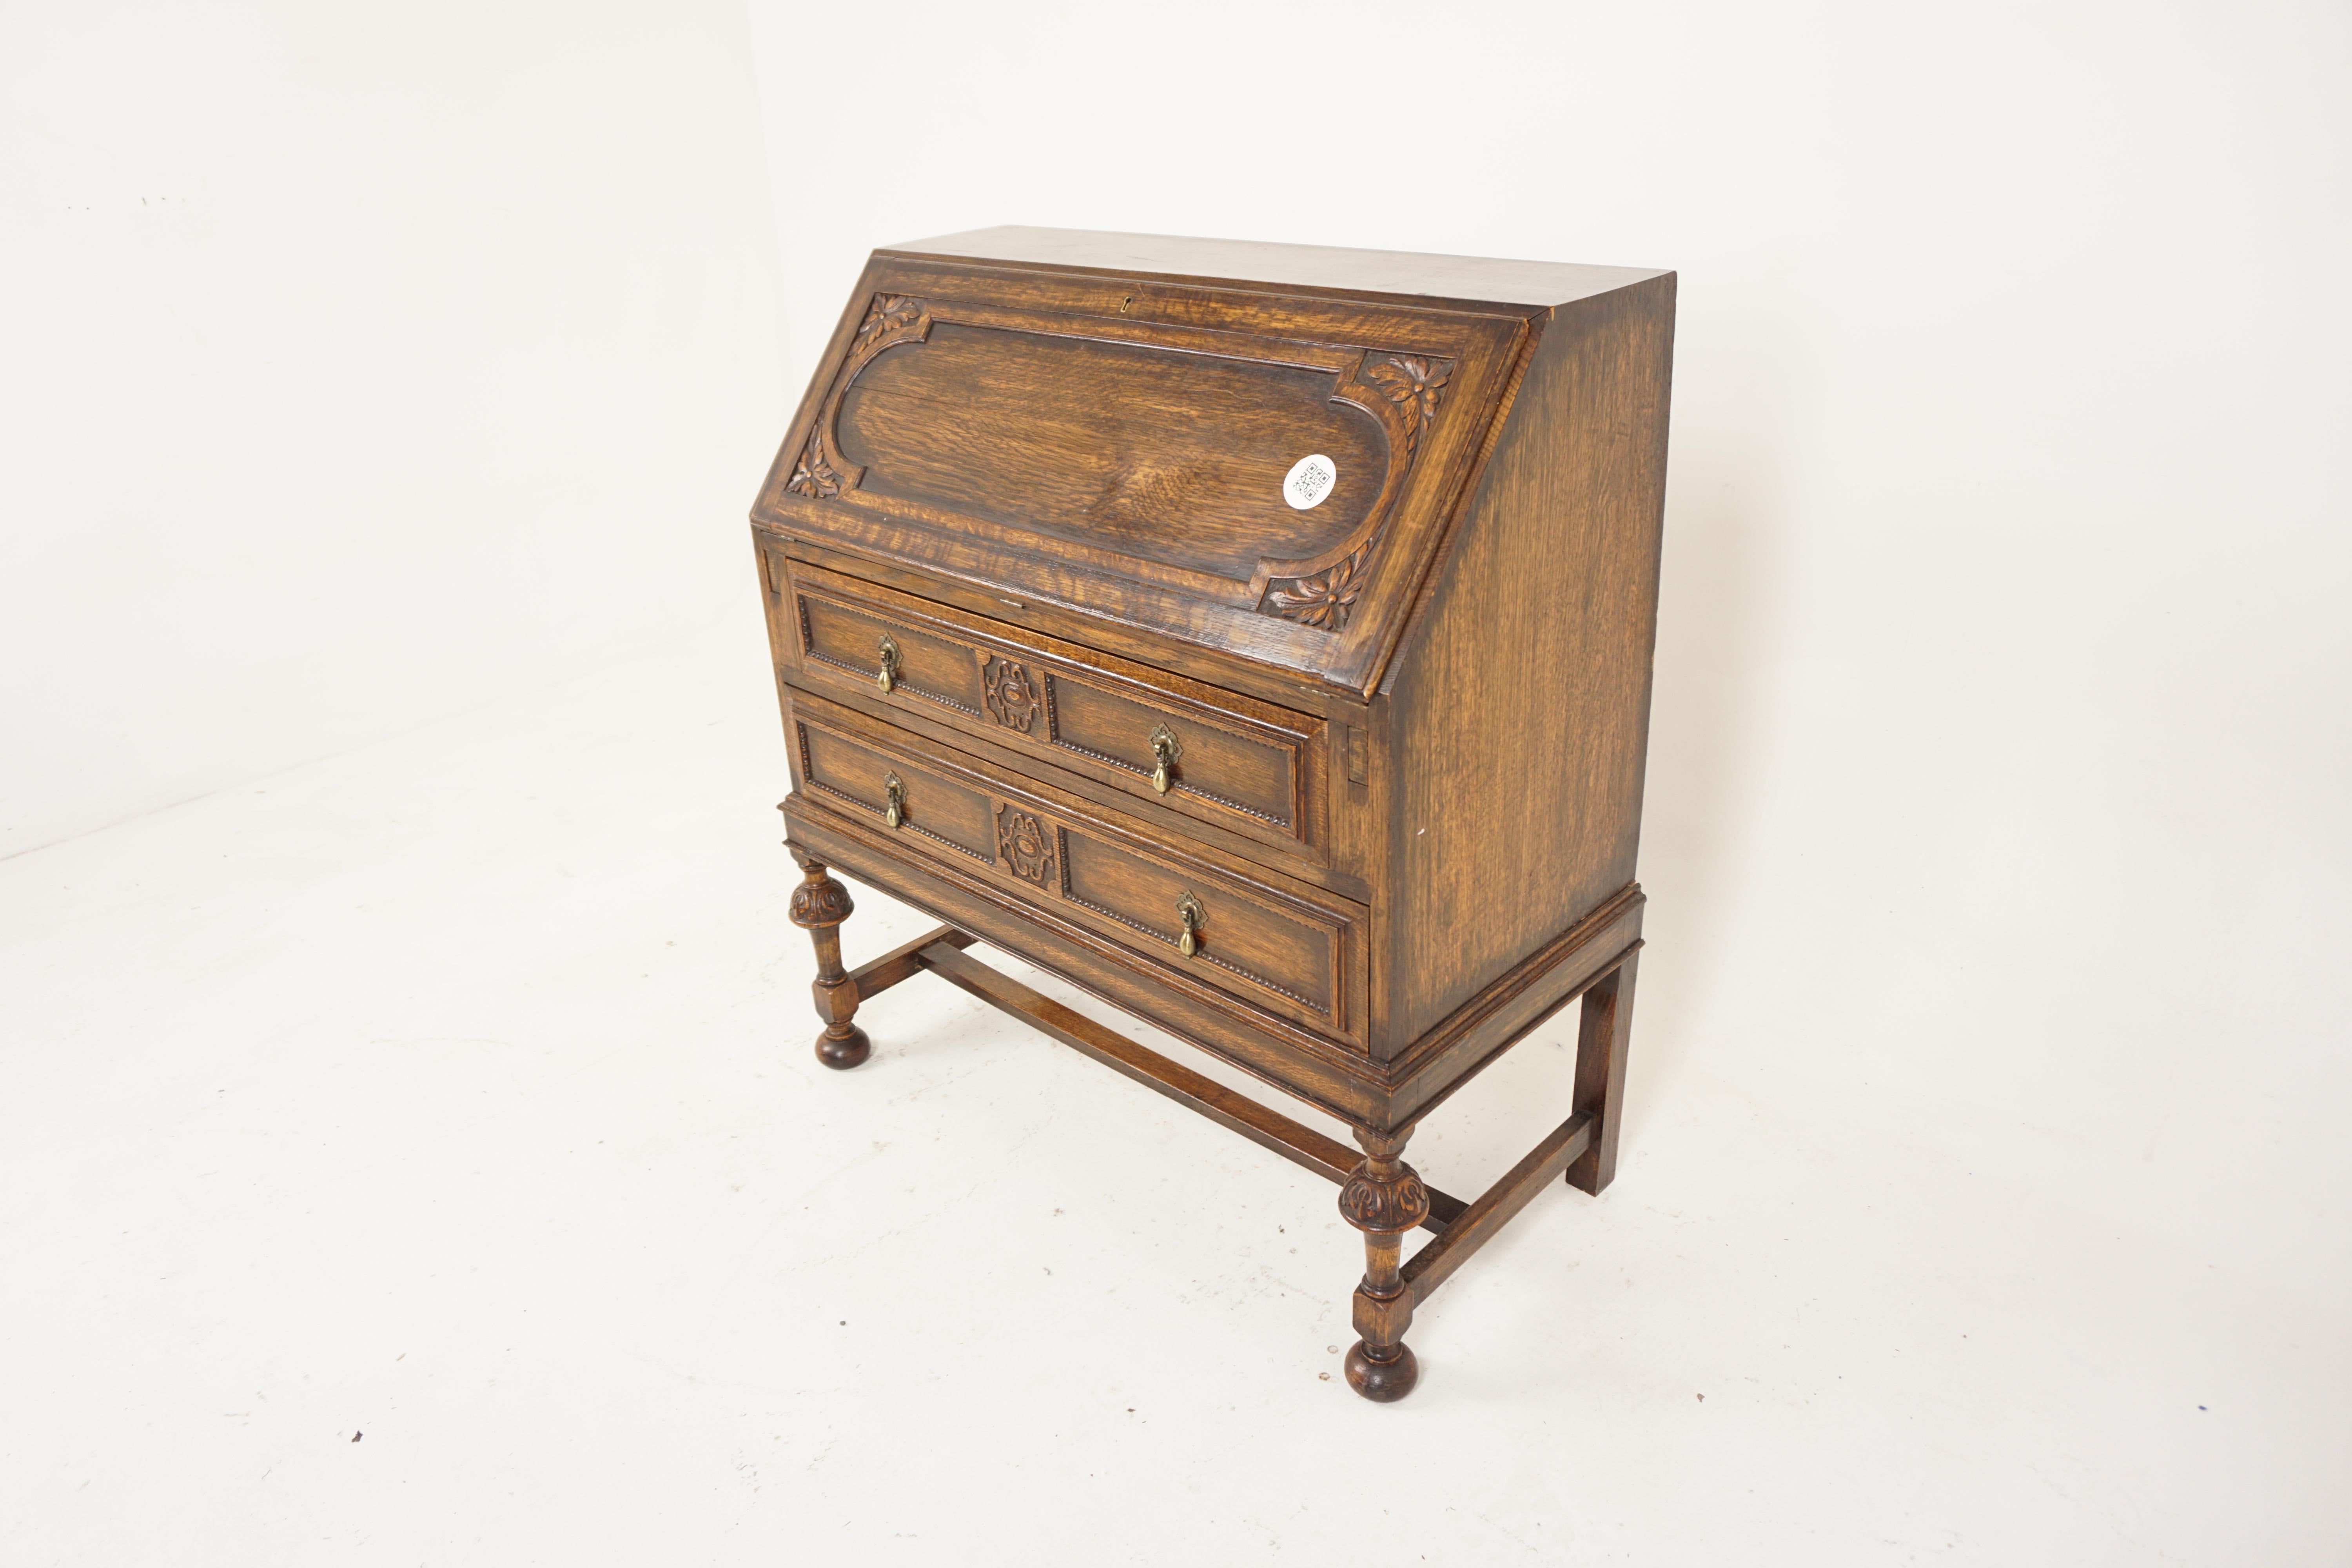 Ant. Oak Jacobean style slant front desk bureau, writing desk, Scotland 1910, H880

$1250
Scotland 1910
Solid Oak
Original finish
Rectangular moulded top
With carved panelled full front lid that opens to reveal eight pigeonholes, pair of